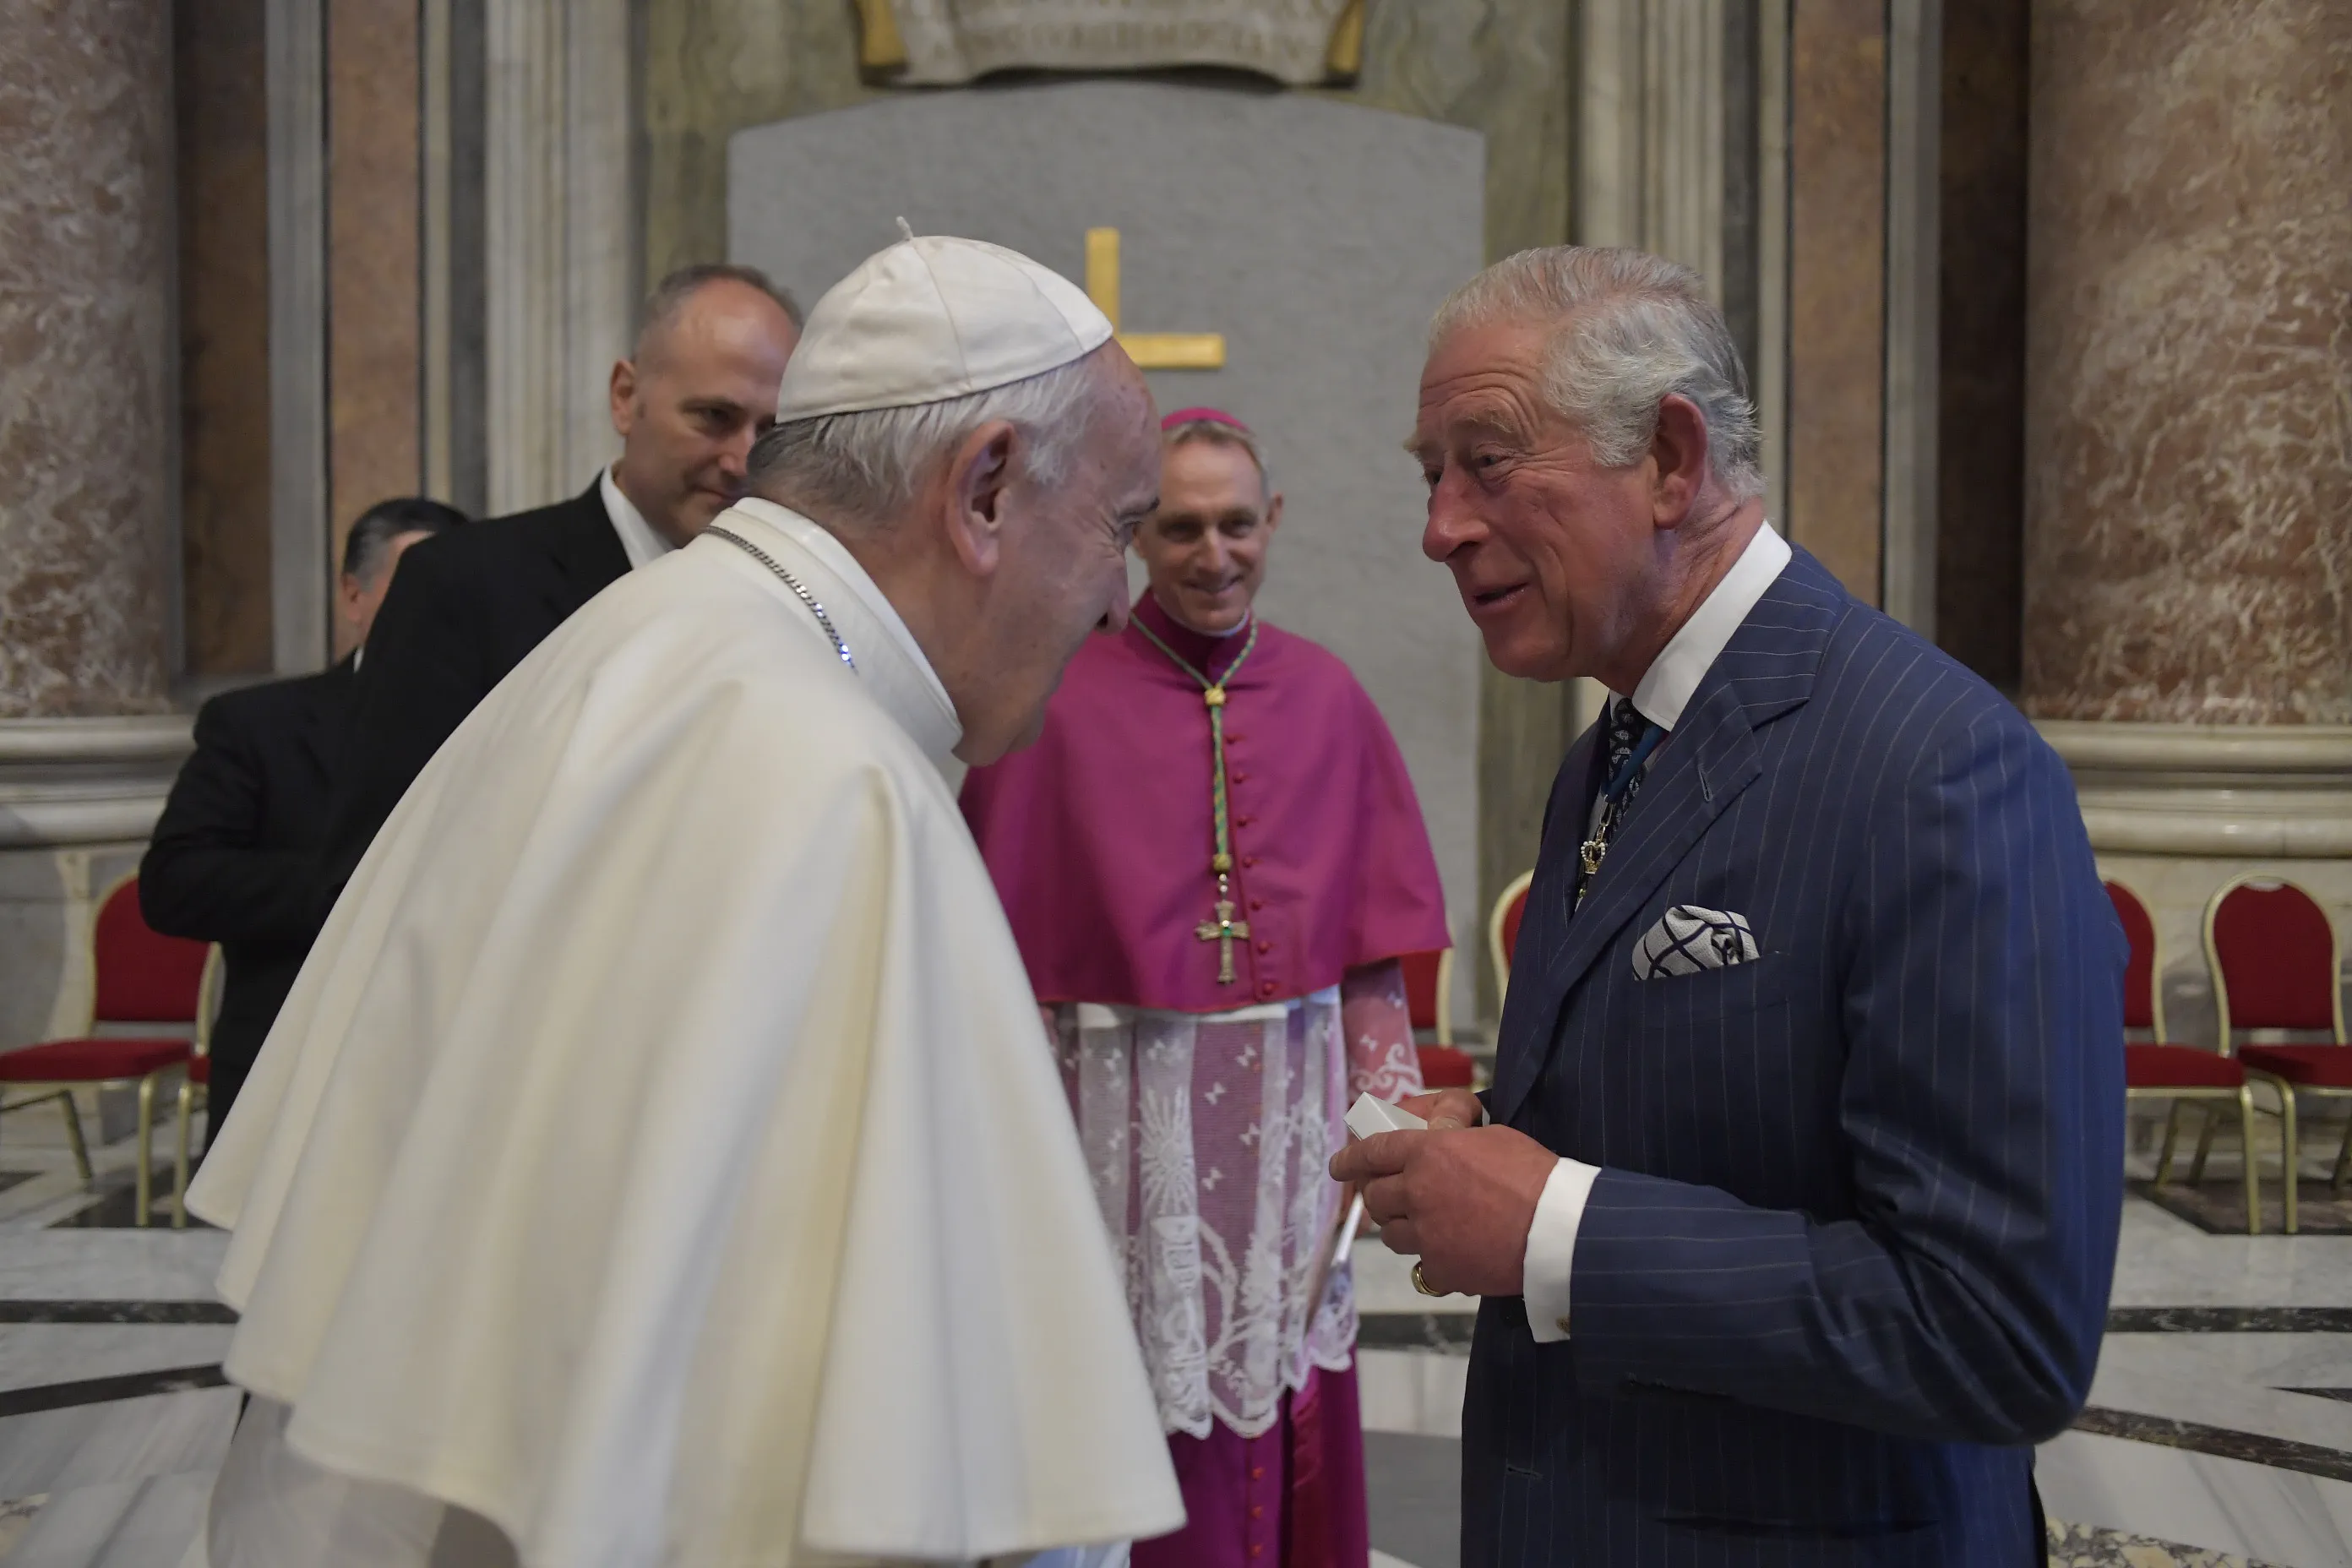 Pope Francis greets His Royal Highness Prince Charles of Wales at the canonization of St. John Henry Newman at the Vatican on Oct. 13, 2019.?w=200&h=150